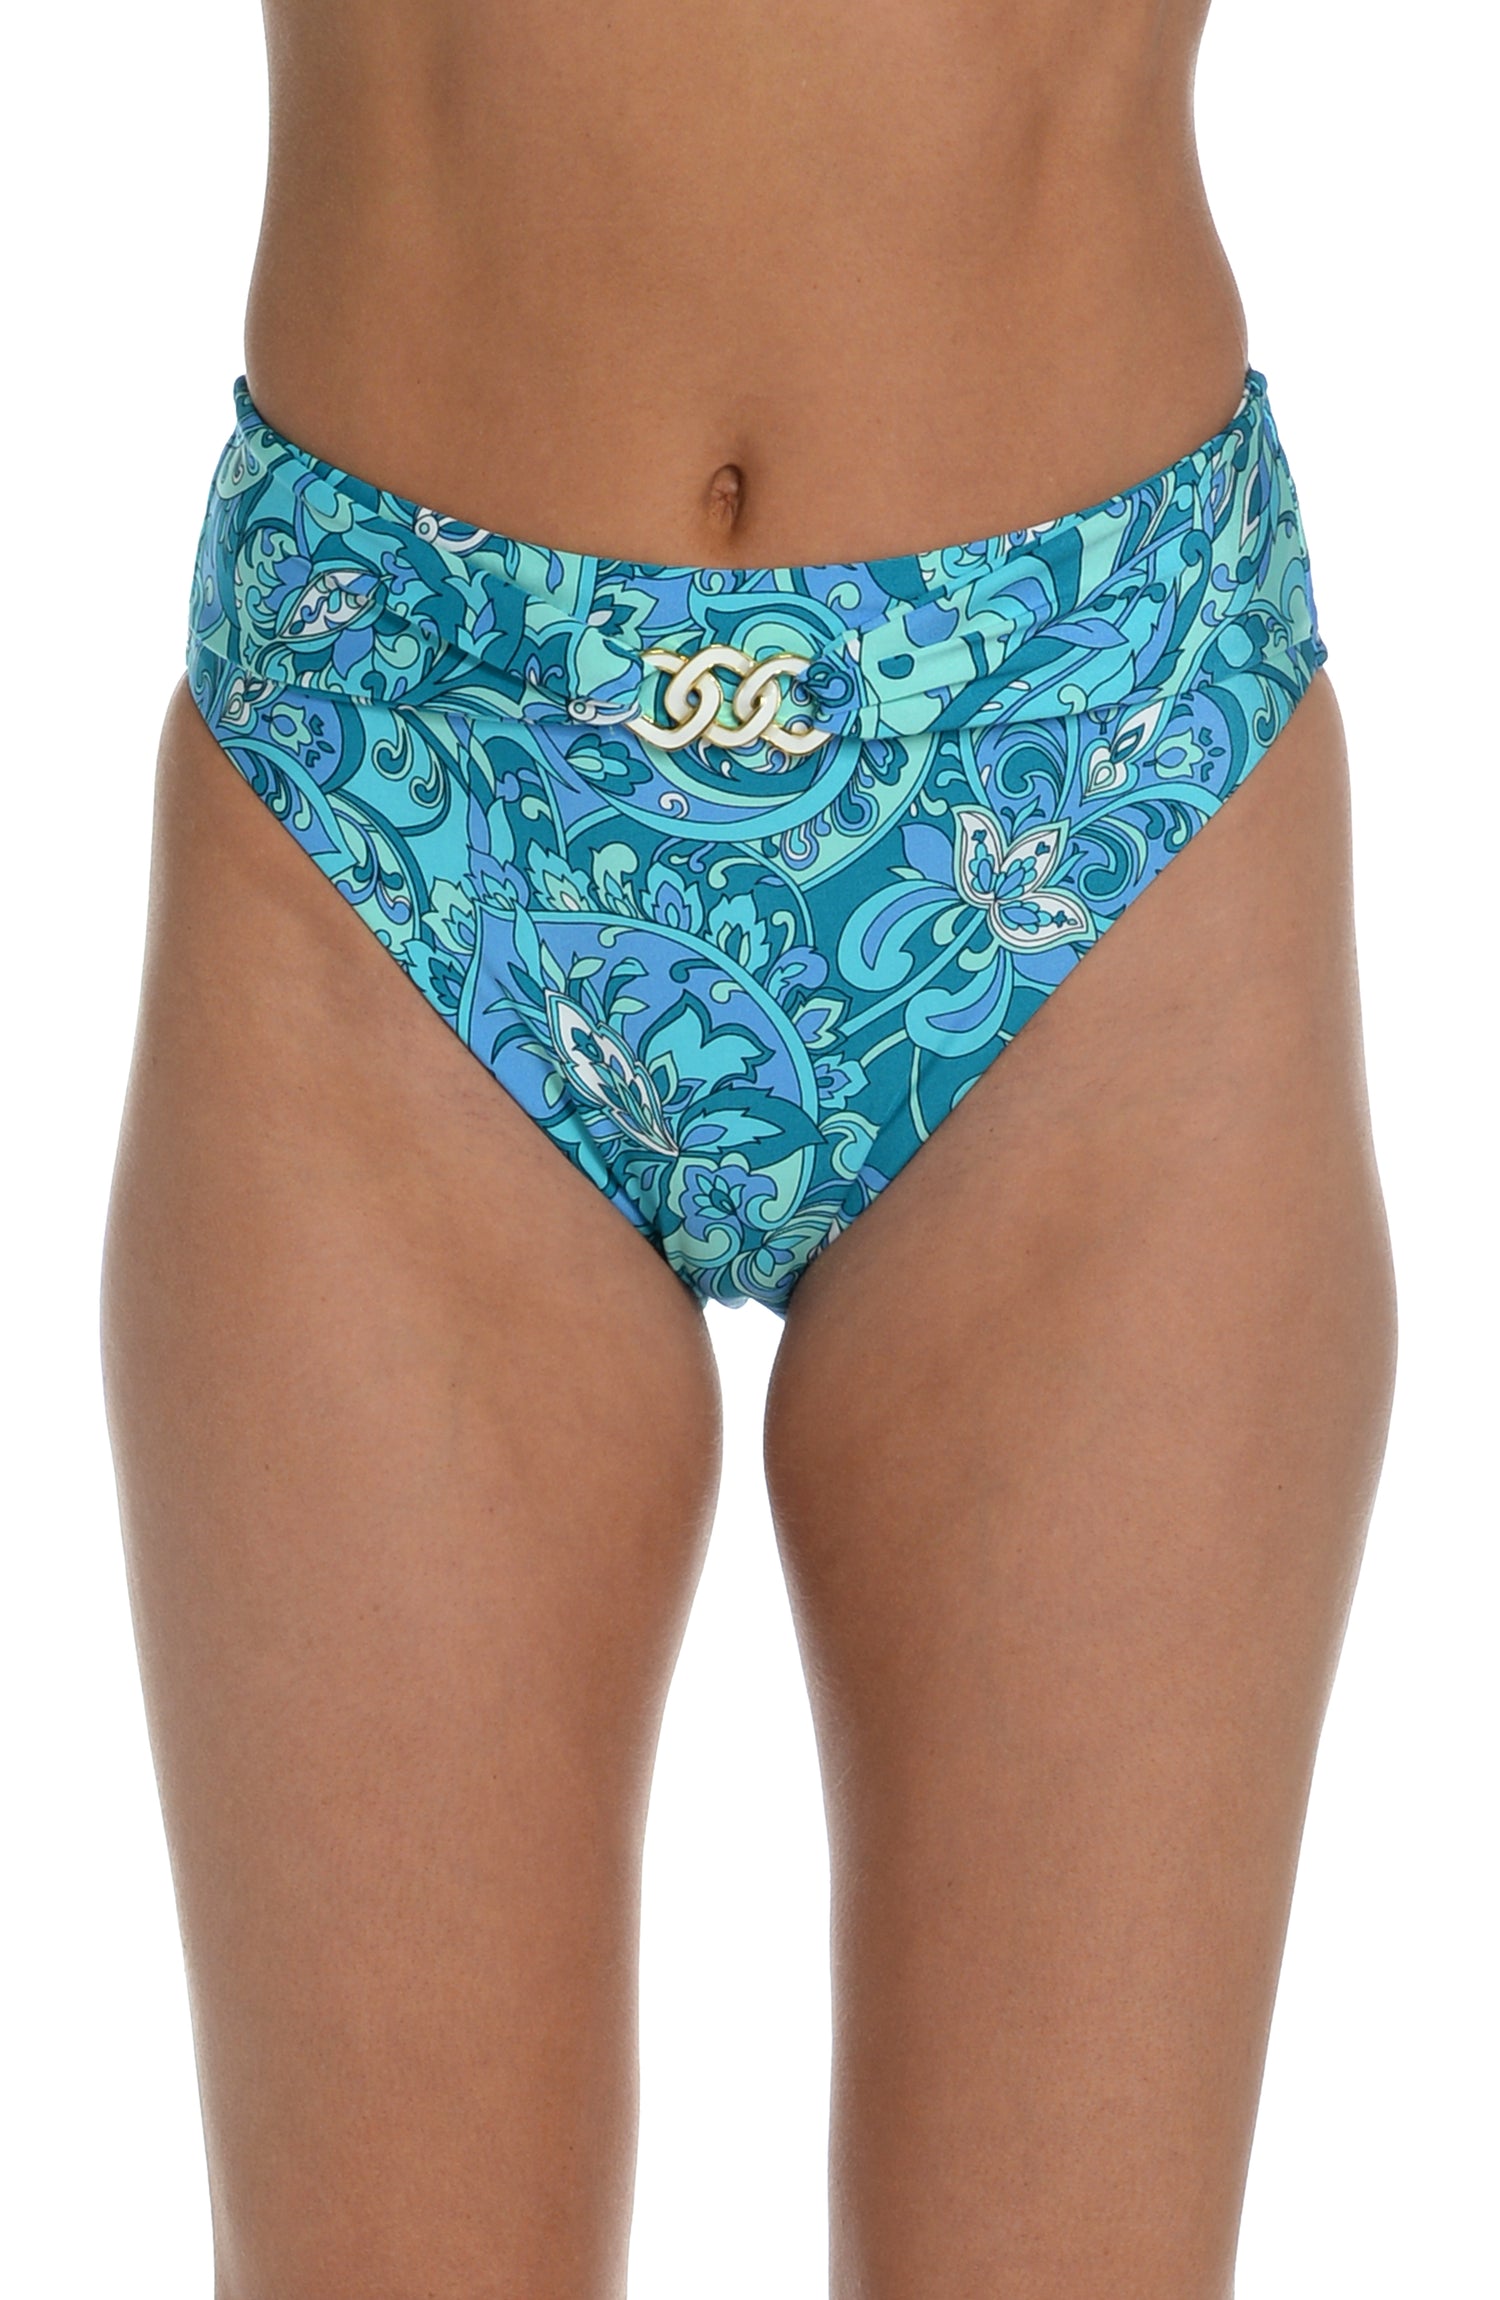 Model is wearing a teal blue bohemian printed high waist bikini bottom from our Boheme Paisley collection.